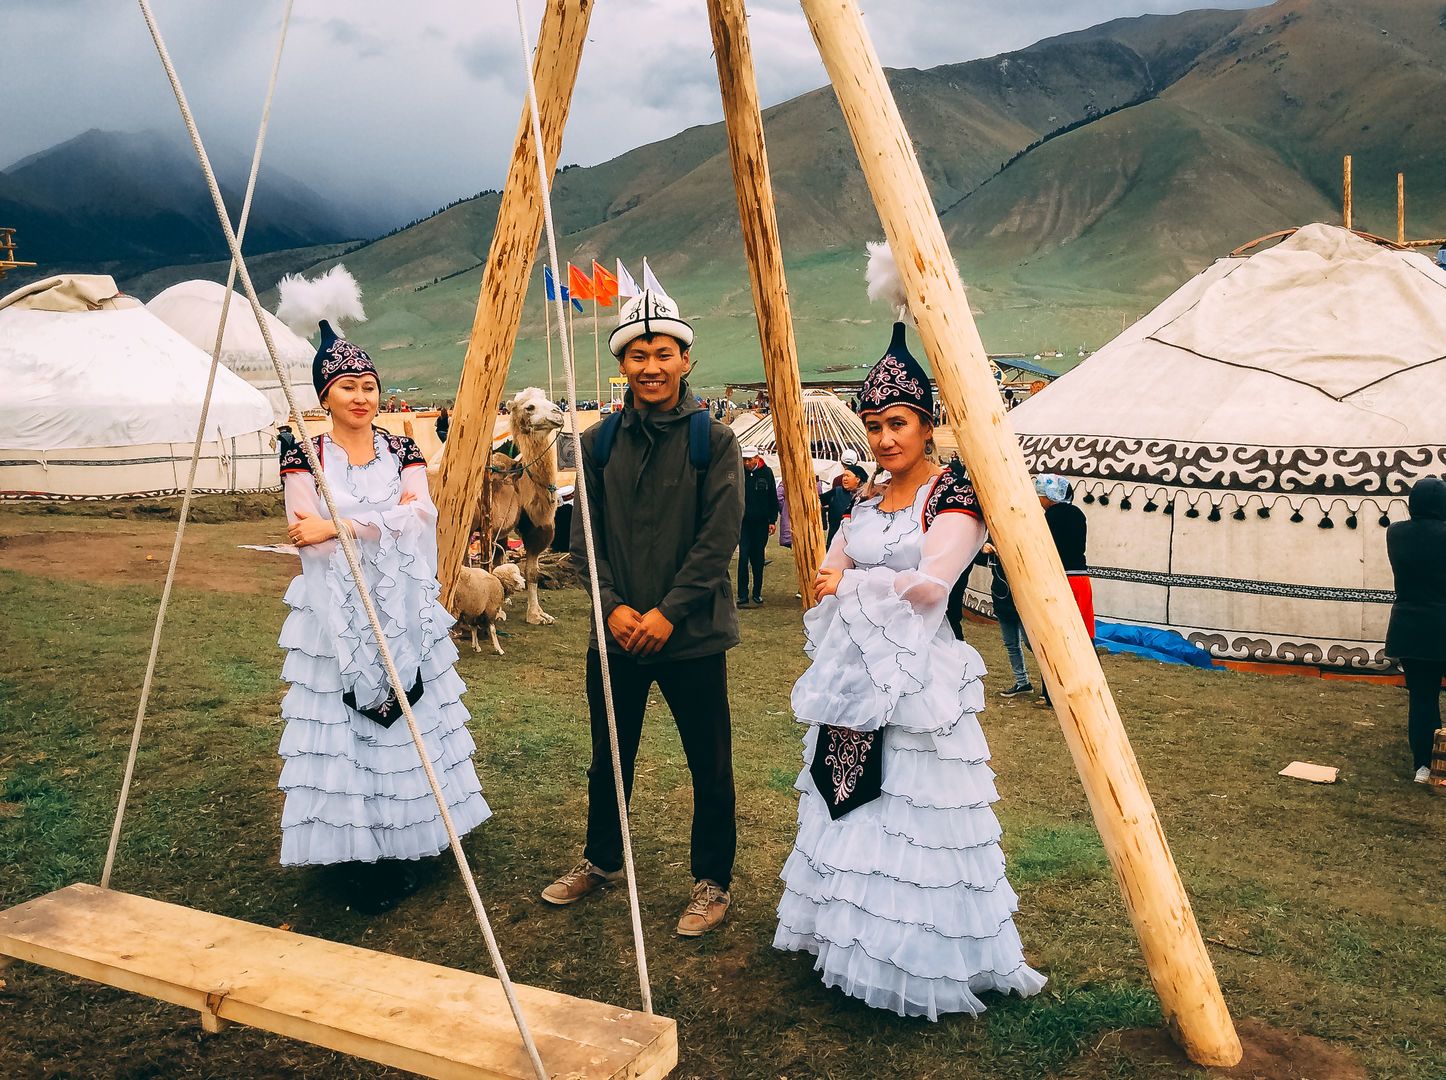 Kyrgyz clothes at the world nomad games